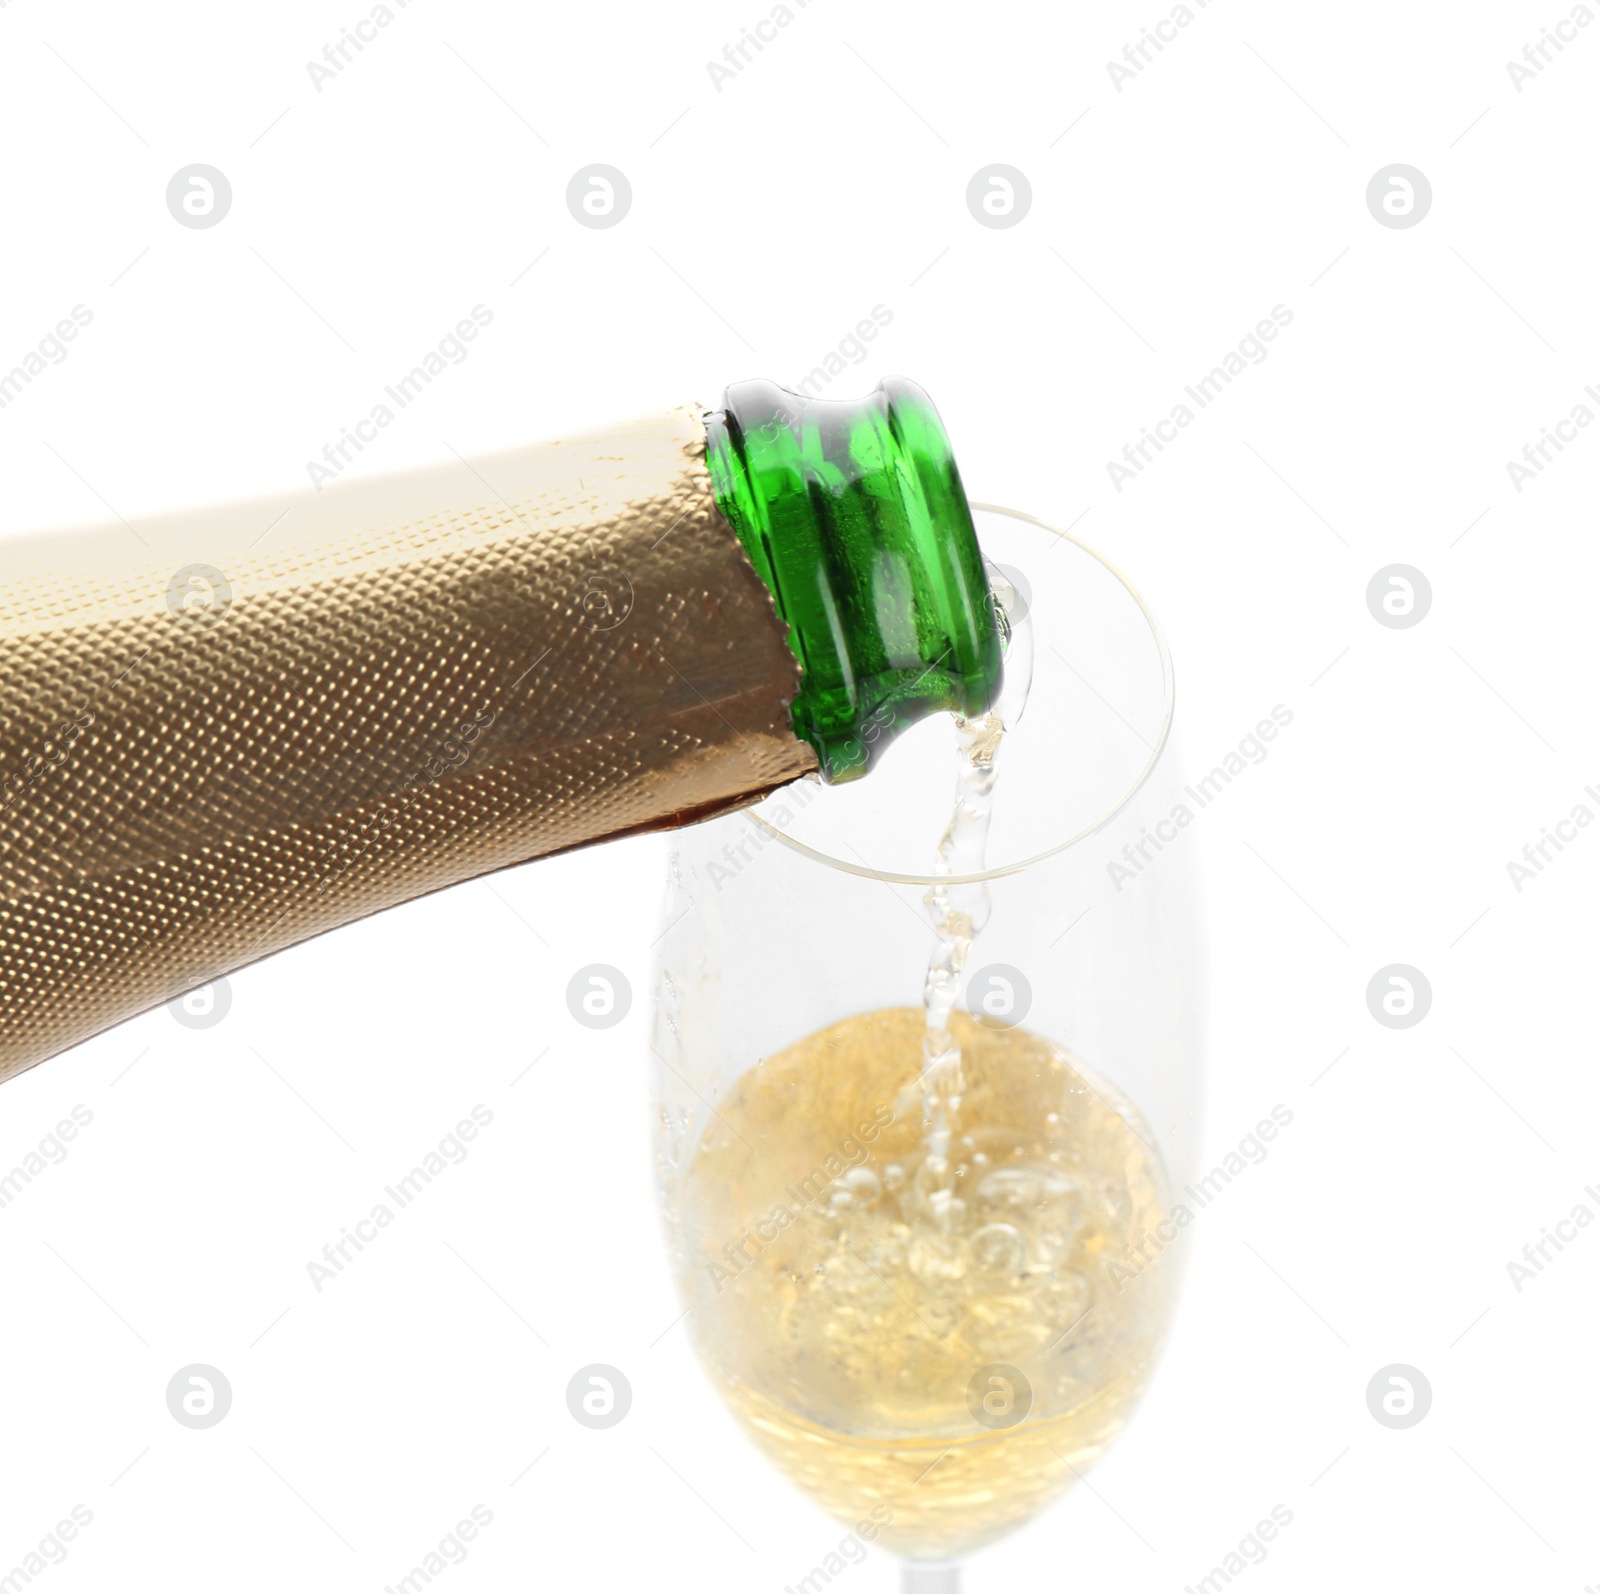 Photo of Pouring champagne from bottle into glass on white background. Festive drink